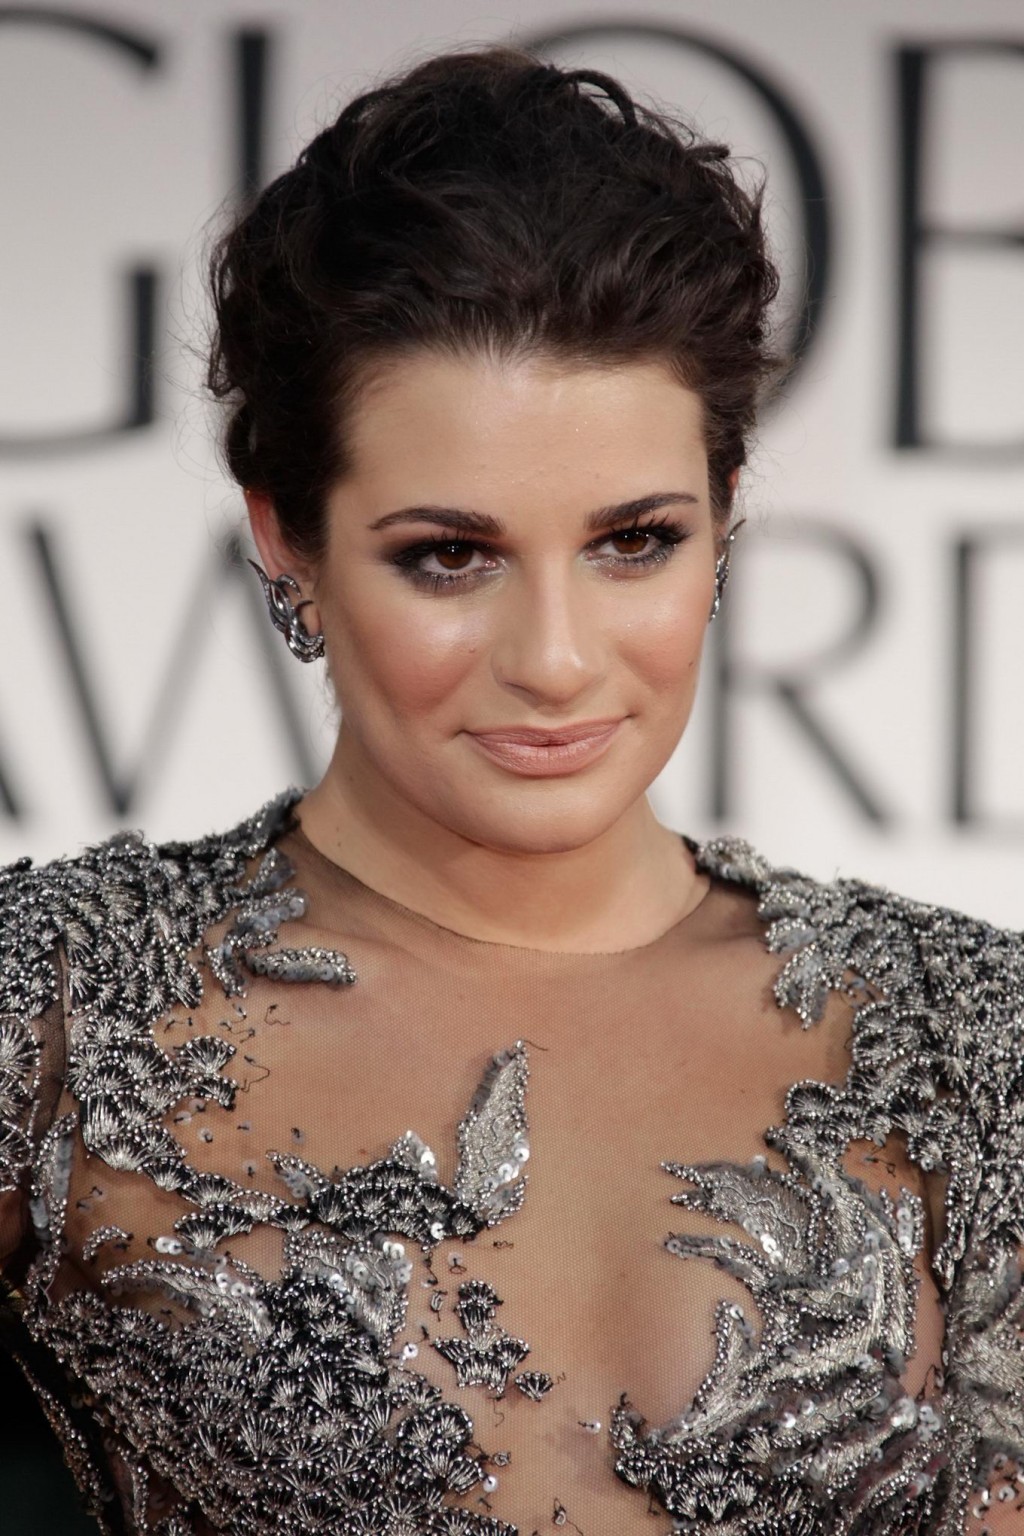 Lea Michele Wearing See Through Lace Dress At The Golden Globes 2012 Porn Pictures Xxx Photos